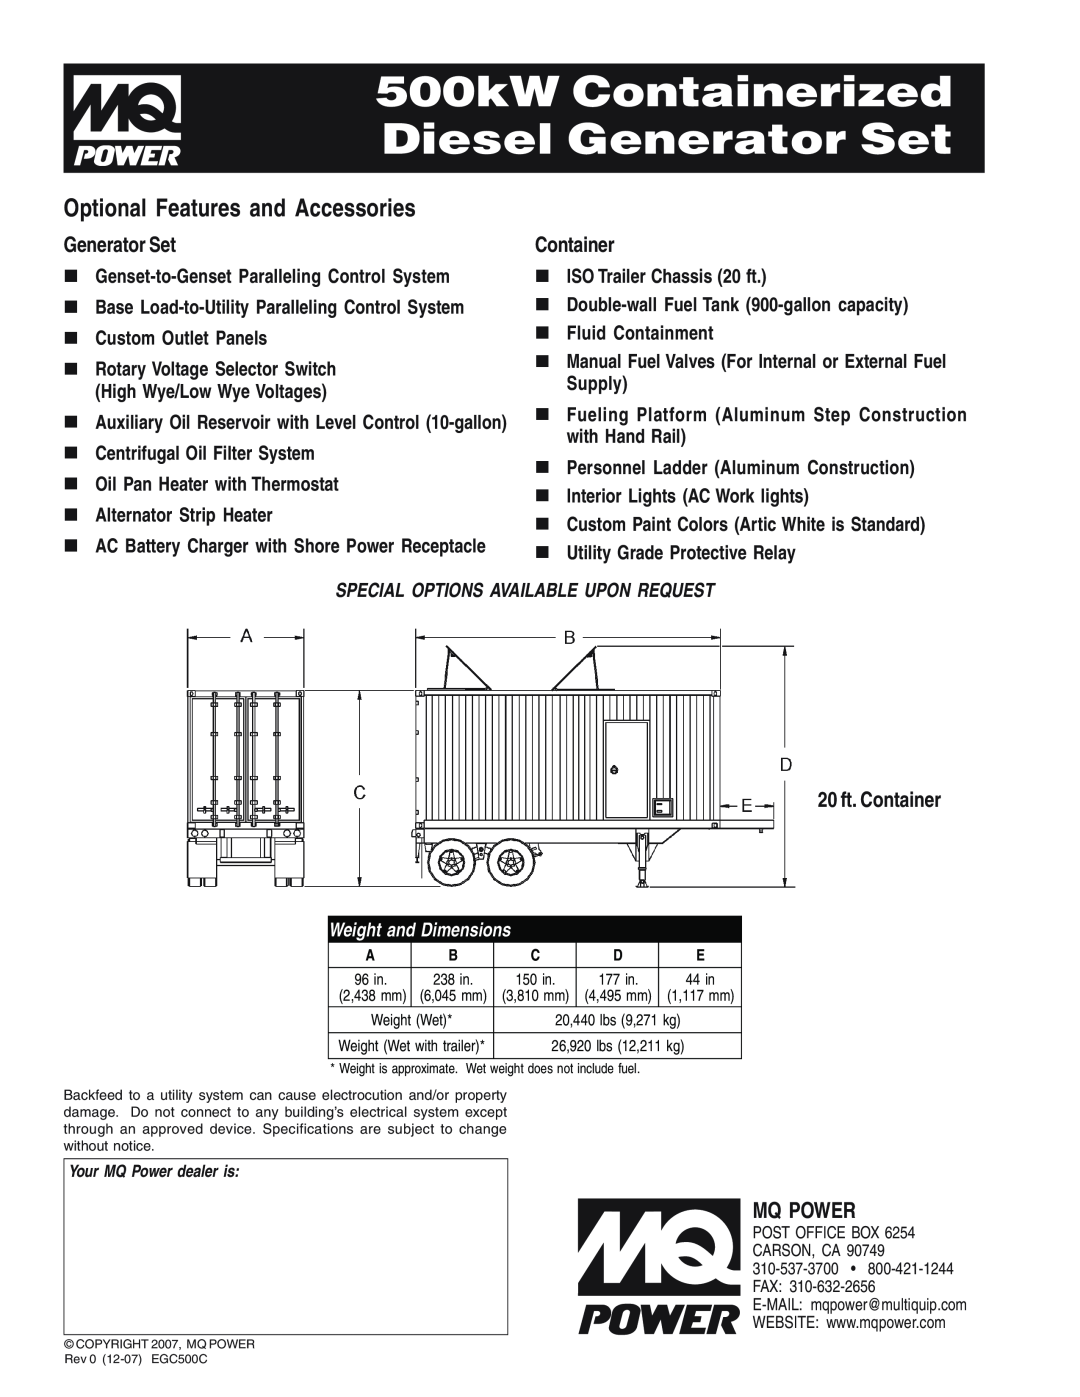 Multiquip EGC-500C Optional Features and Accessories, Generator Set, 20 ft. Container, Weight and Dimensions, Mq Power 